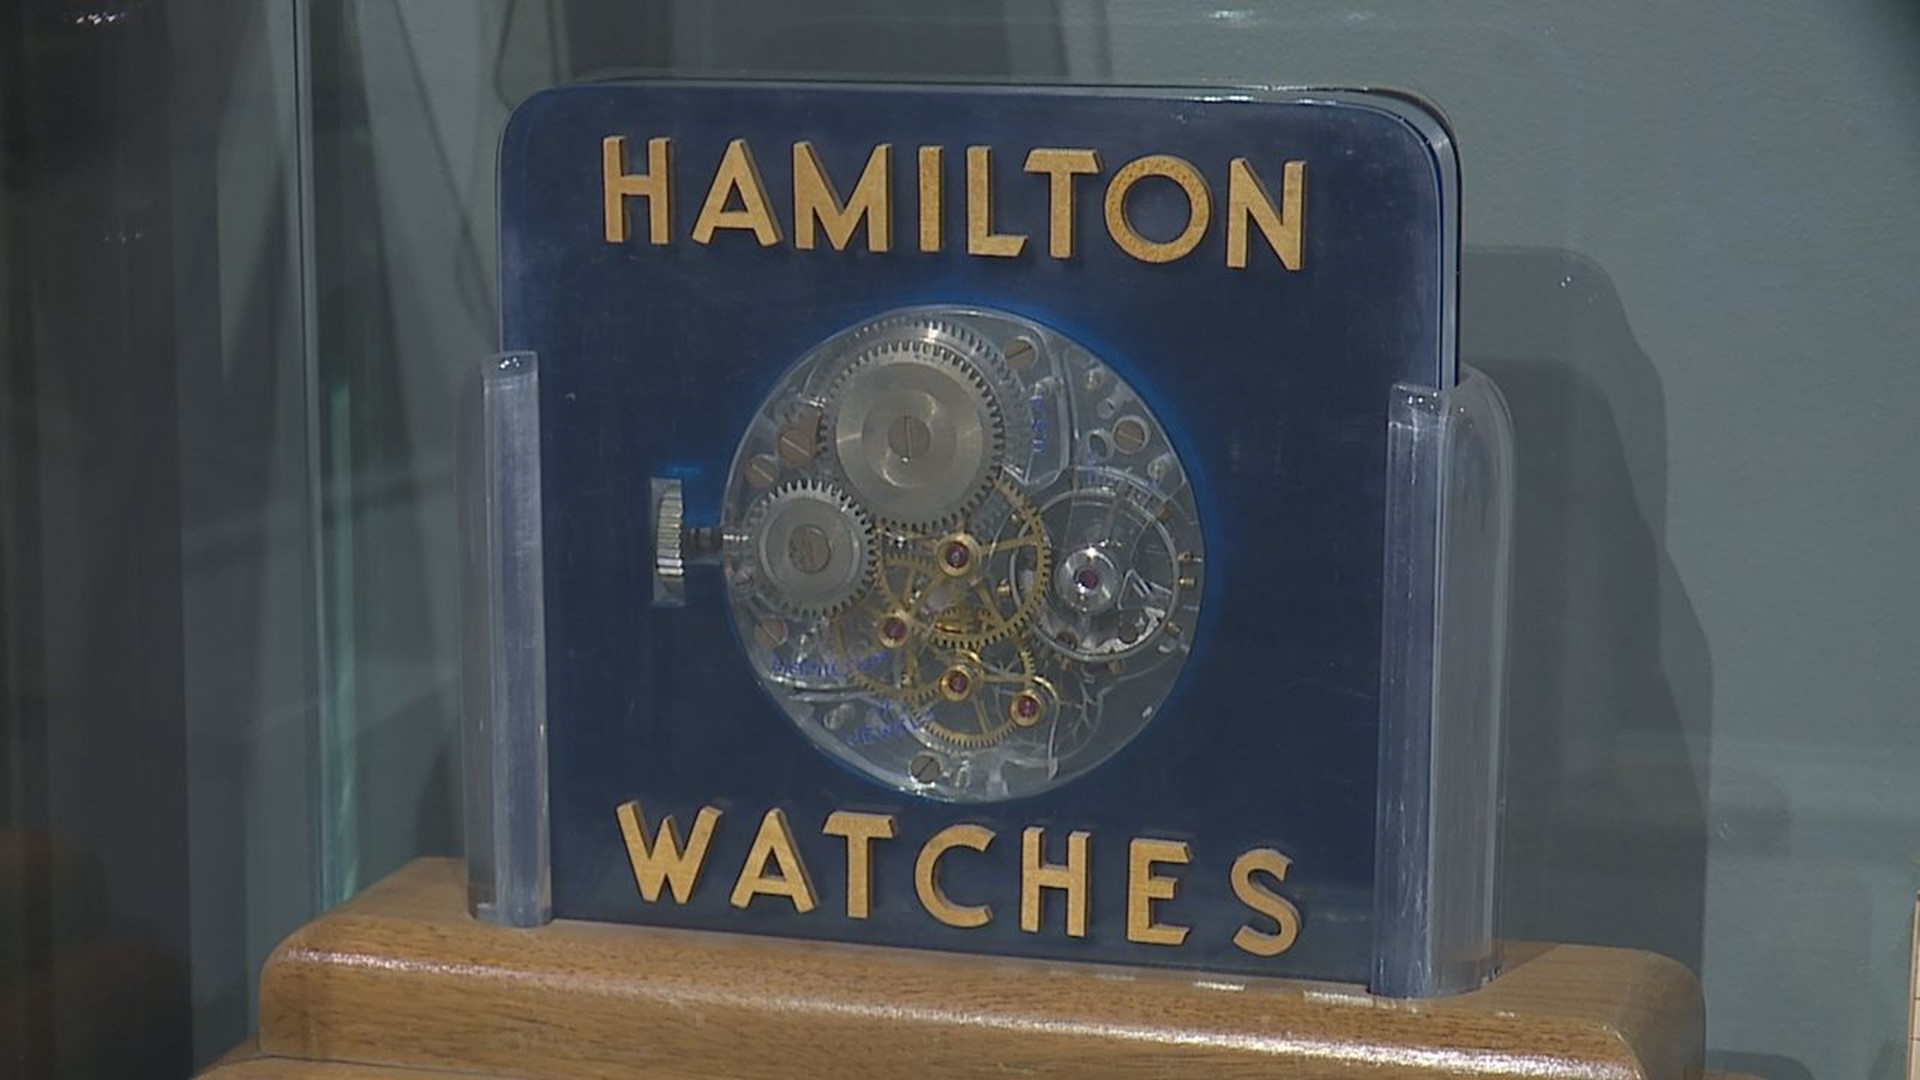 We look at the companies before Hamilton Watches and see how the watchmaker impacted WWII.